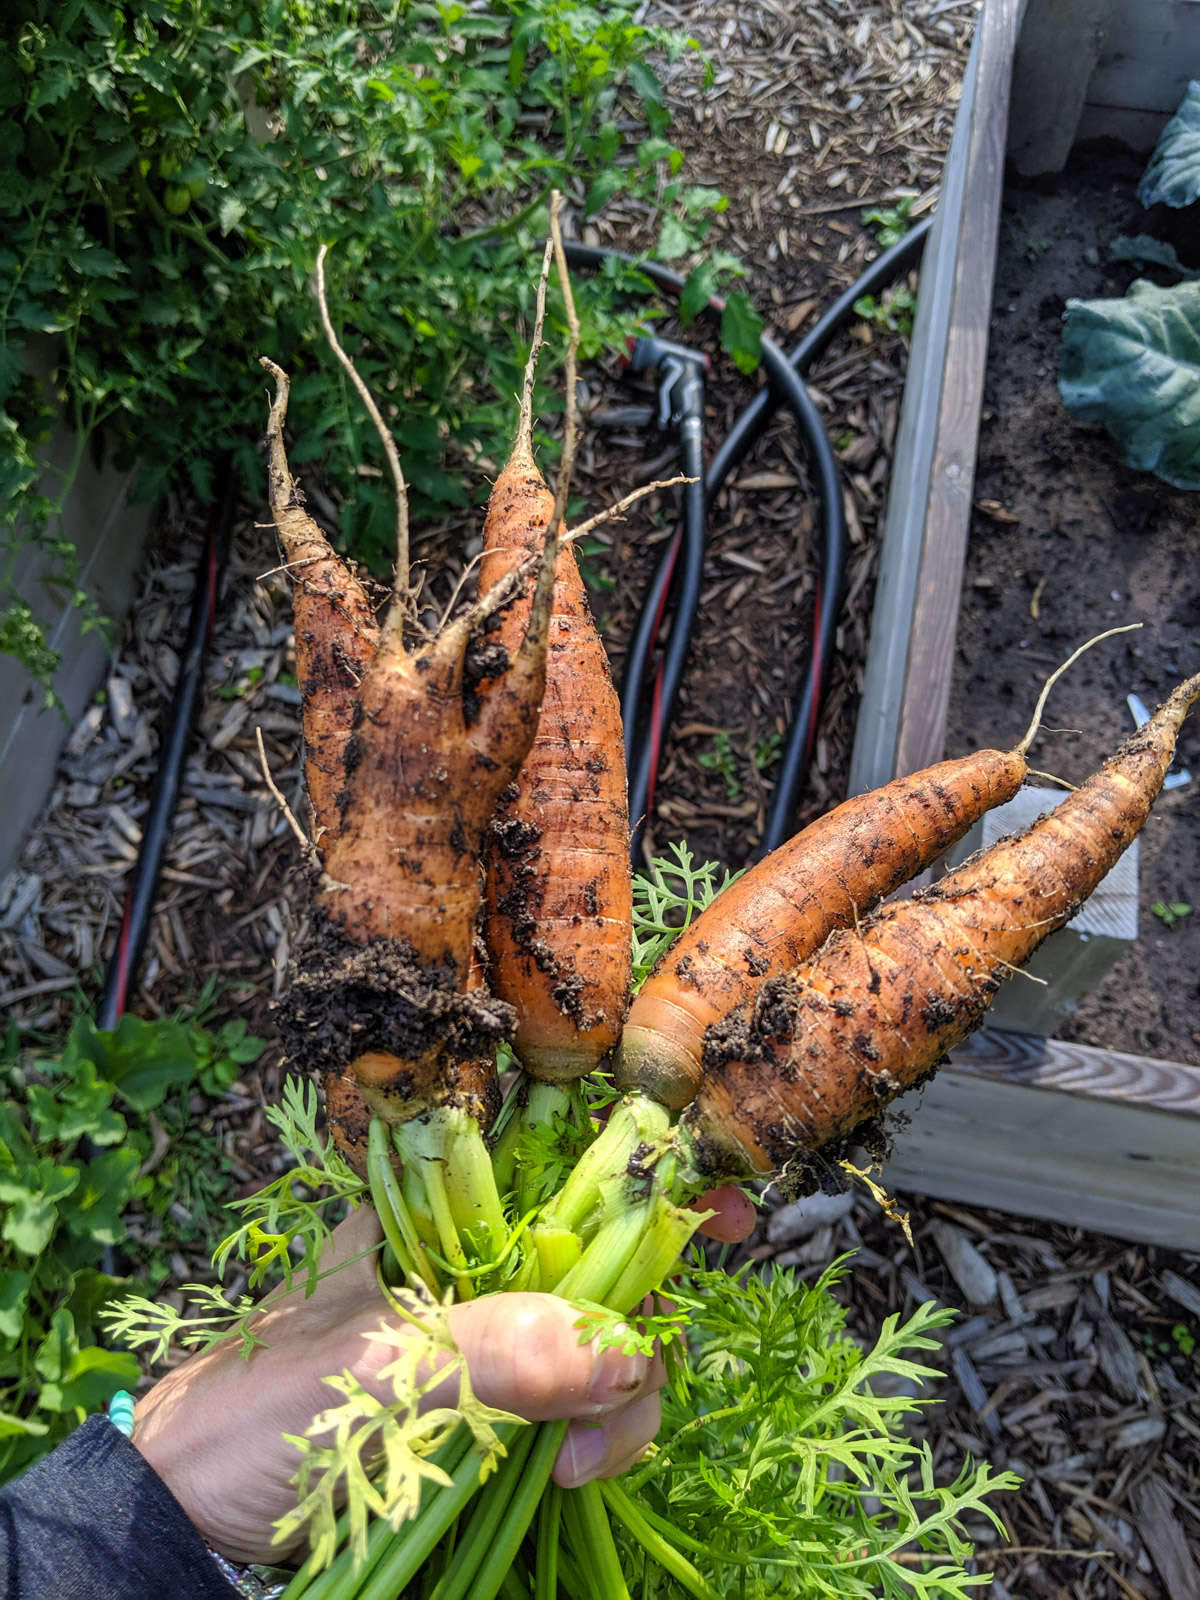 Carrots harvested from the garden.